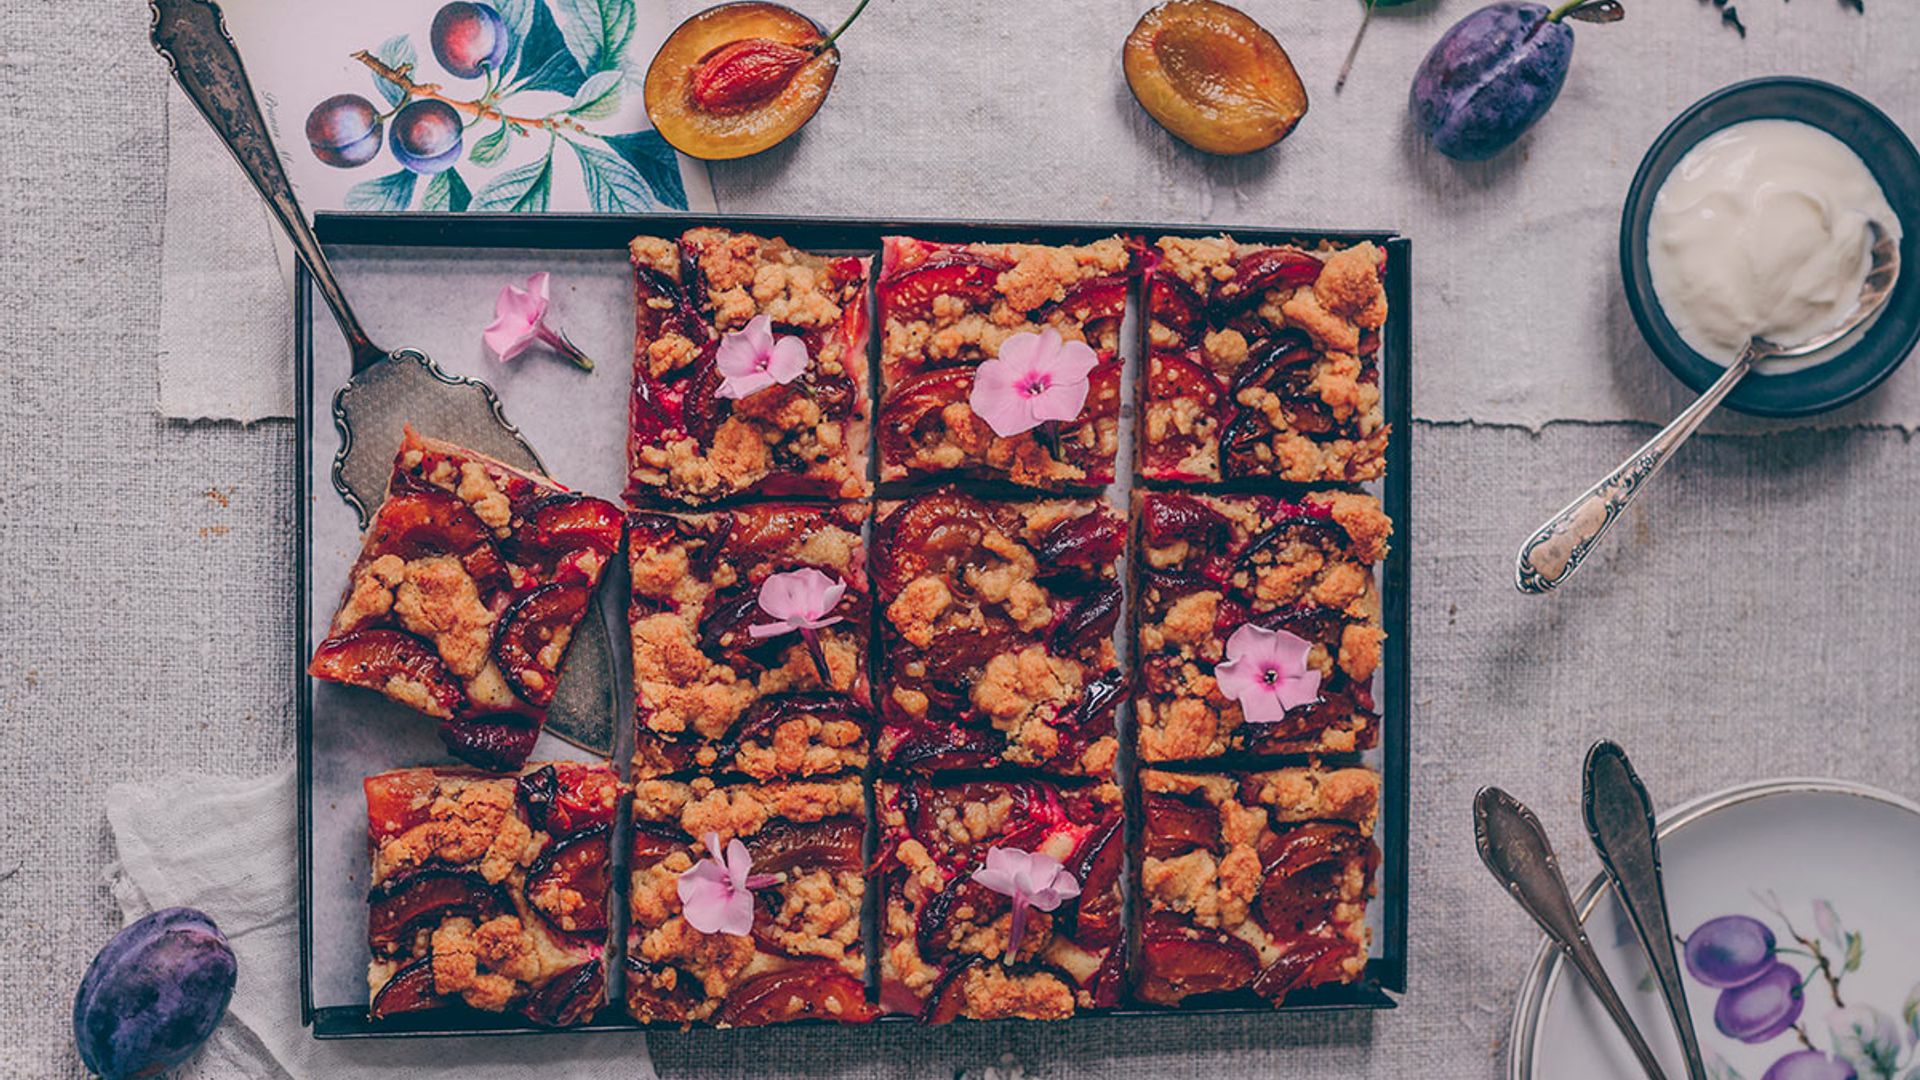 Did the cinnamon-rolls on Bake Off leave you drooling? We have the perfect cinnamon and plum traybake recipe for you!